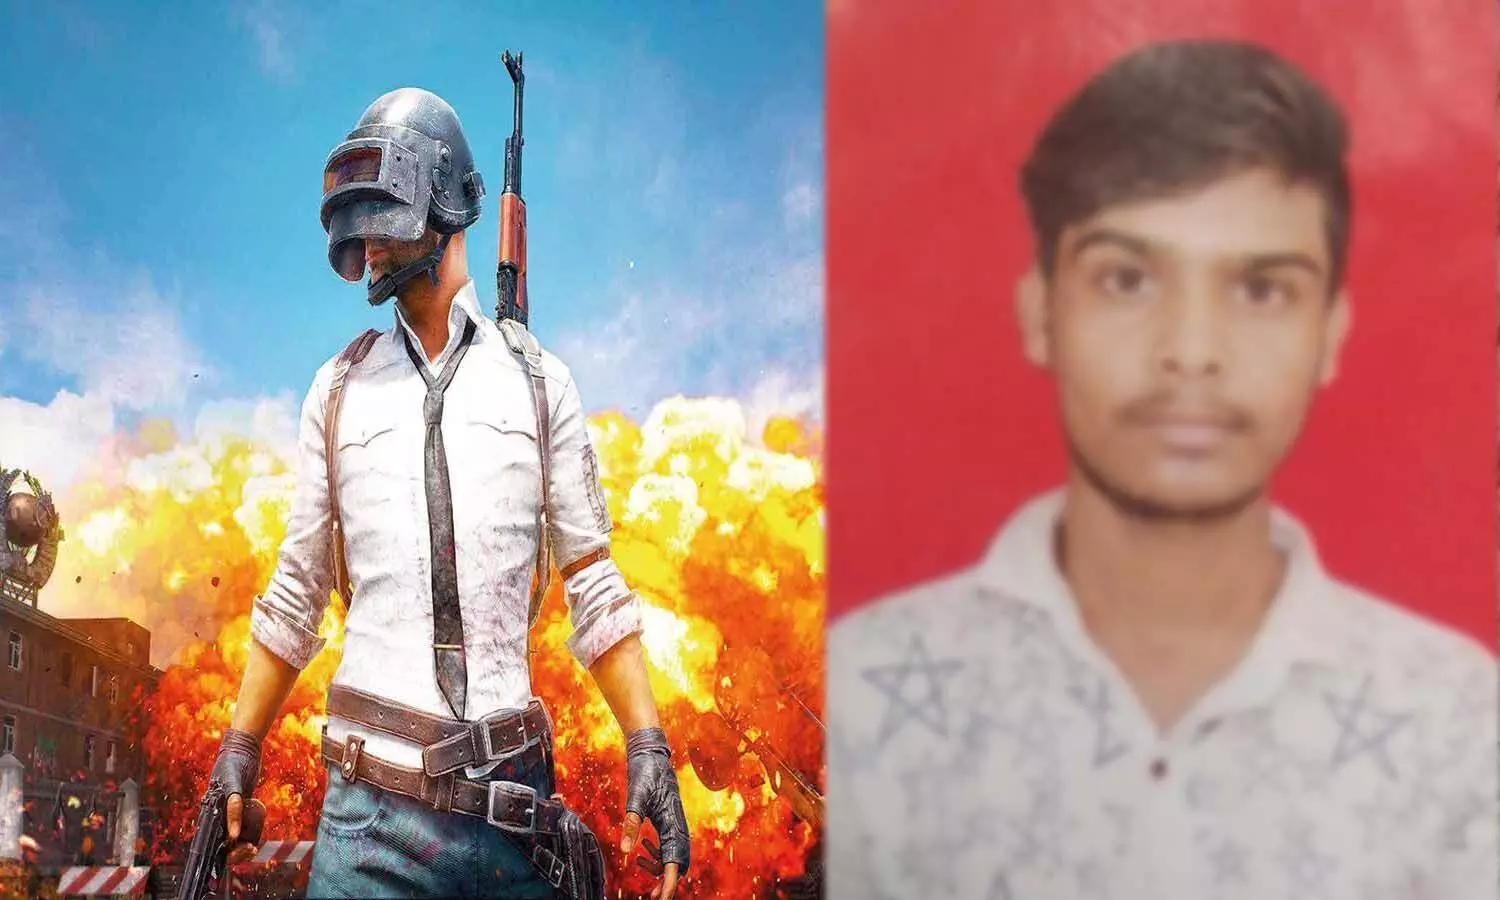 Teenager playing pubg game on railway track dies after being hit by train